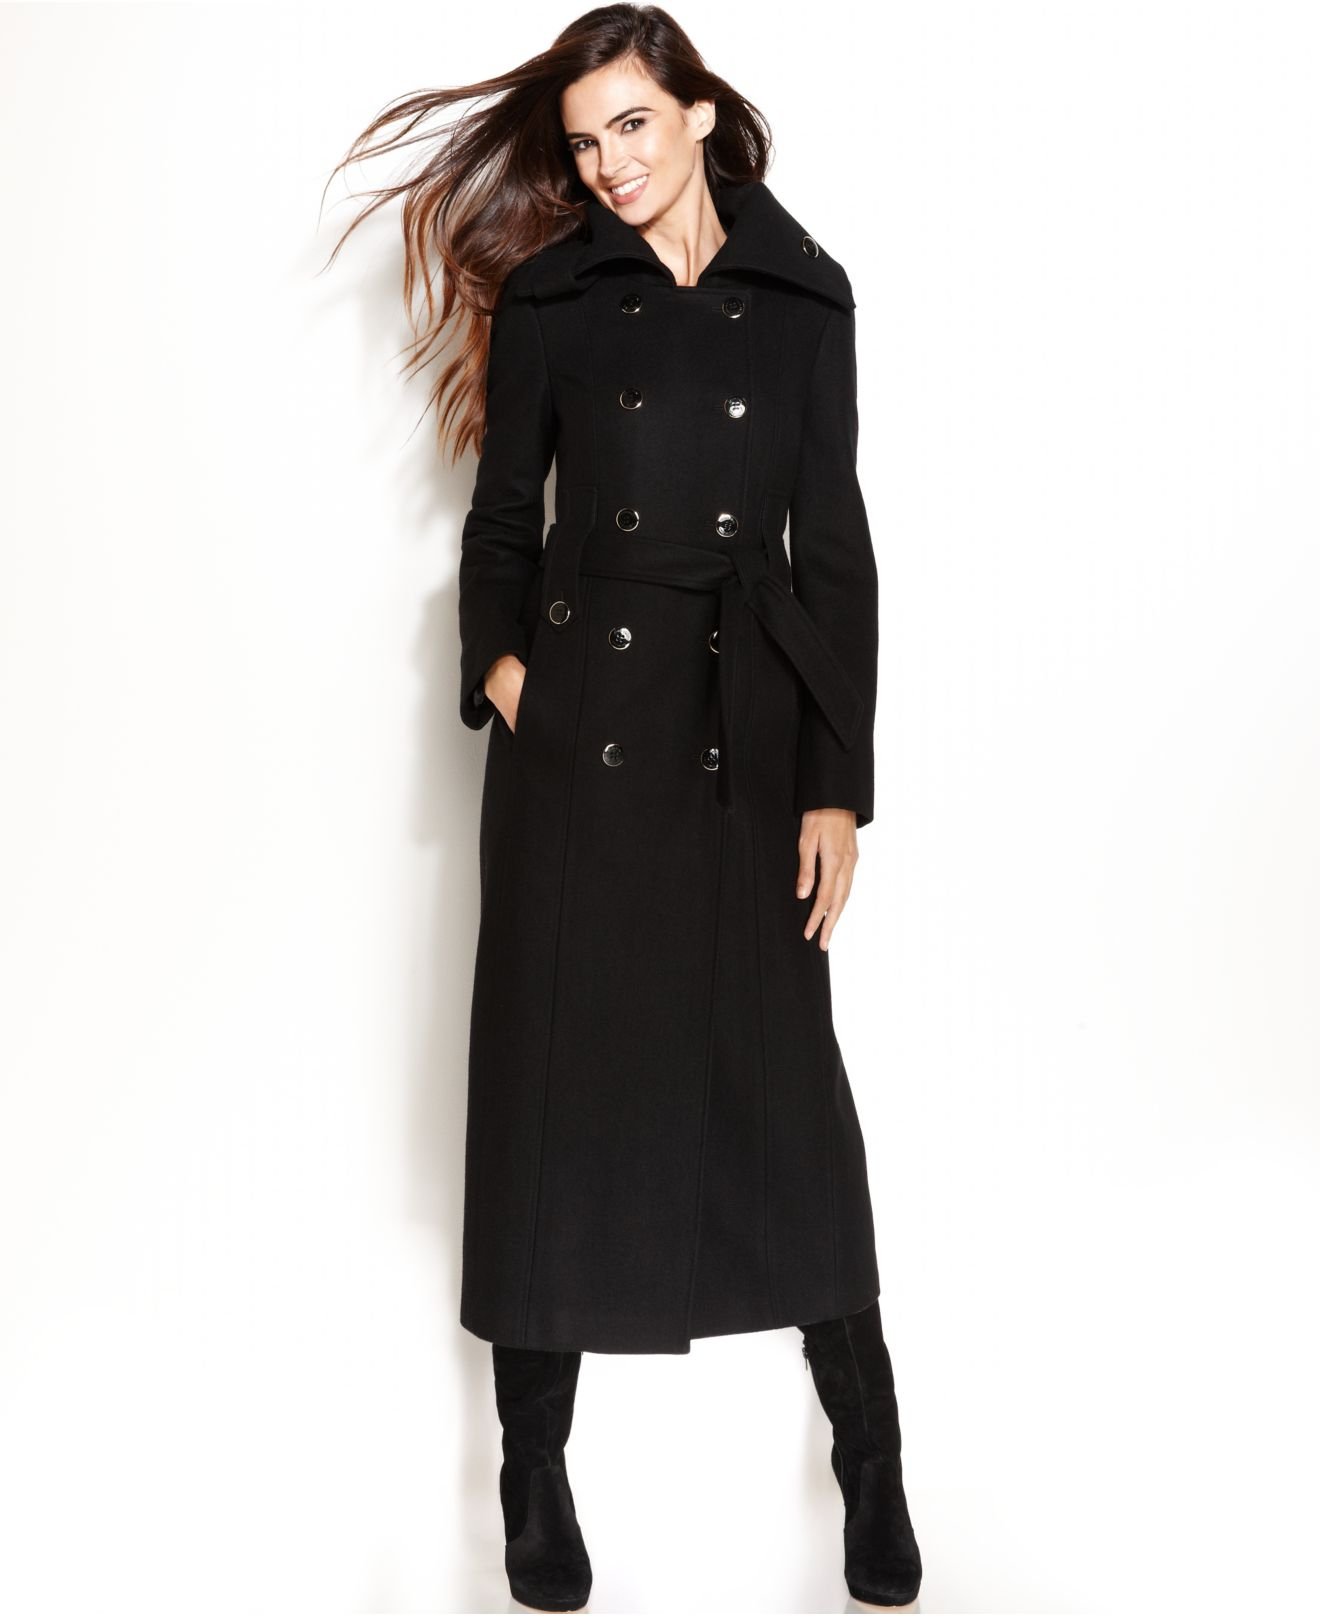 Calvin Klein Wool-Blend Double-Breasted Belted Maxi Coat in Black - Lyst